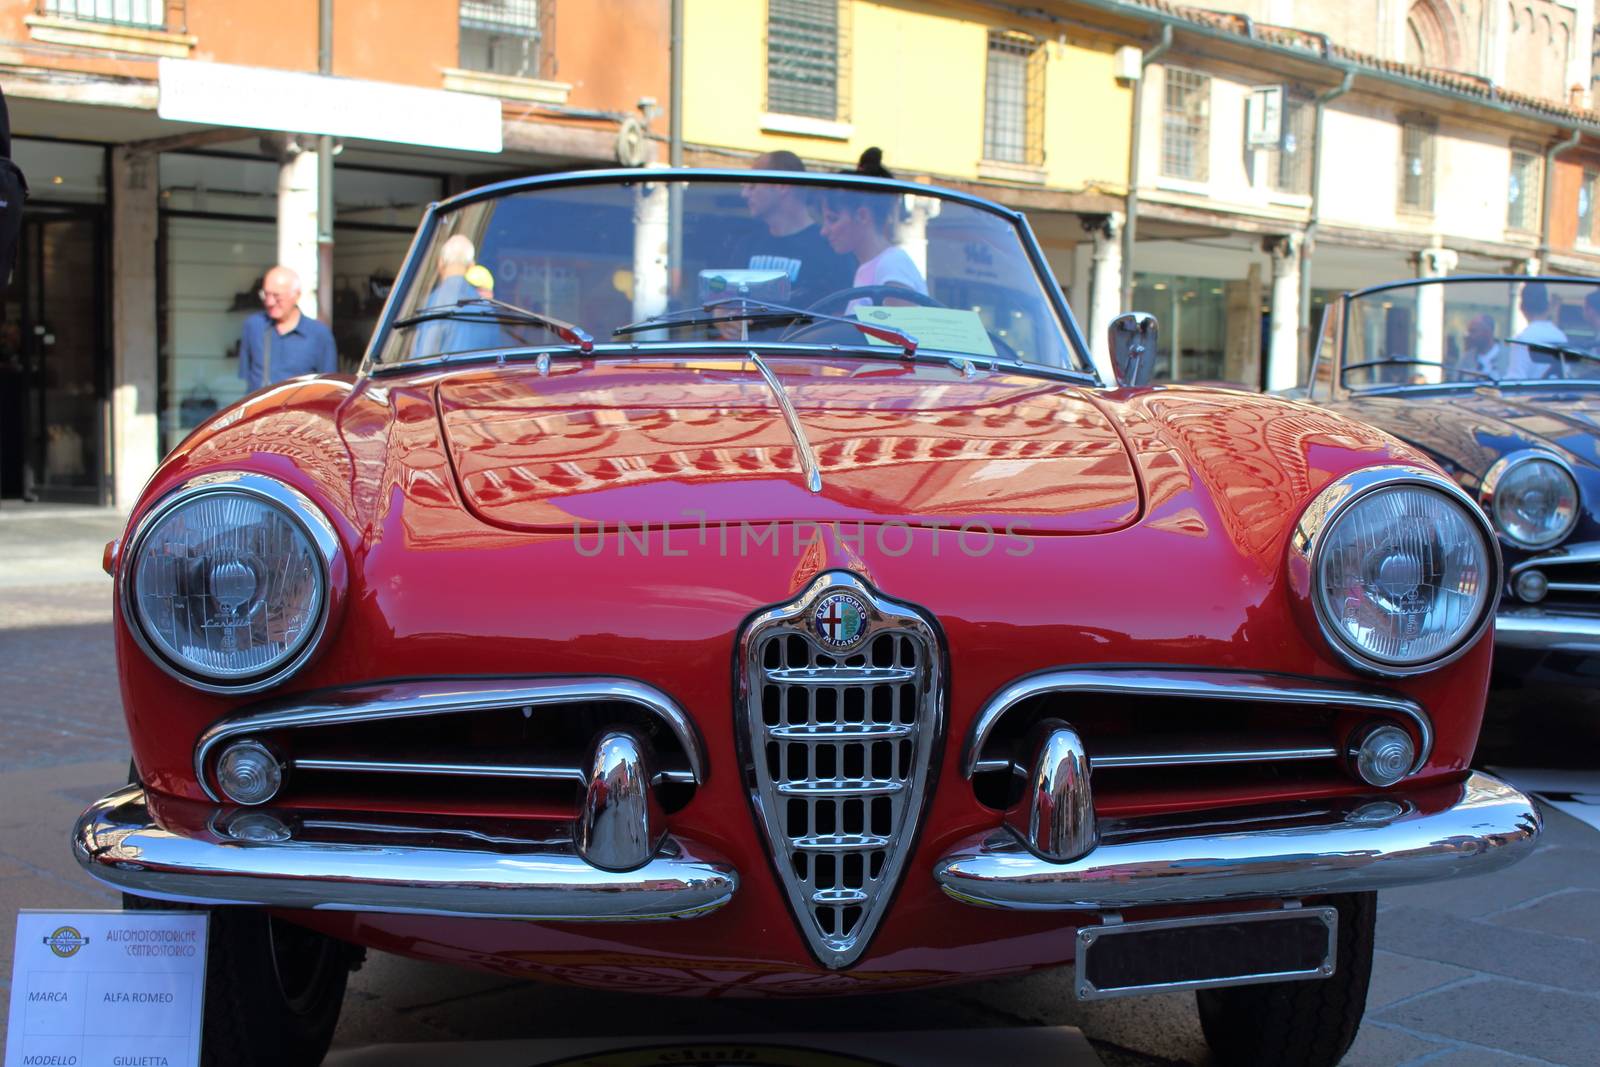 Ferrara, Italia - September 24, 2016: The event "AutoMotoStoriche in Old Town" you can admire an exhibition of cars and motorcycles in the historic center of Ferrara. Front of Alfa Romeo Giulietta